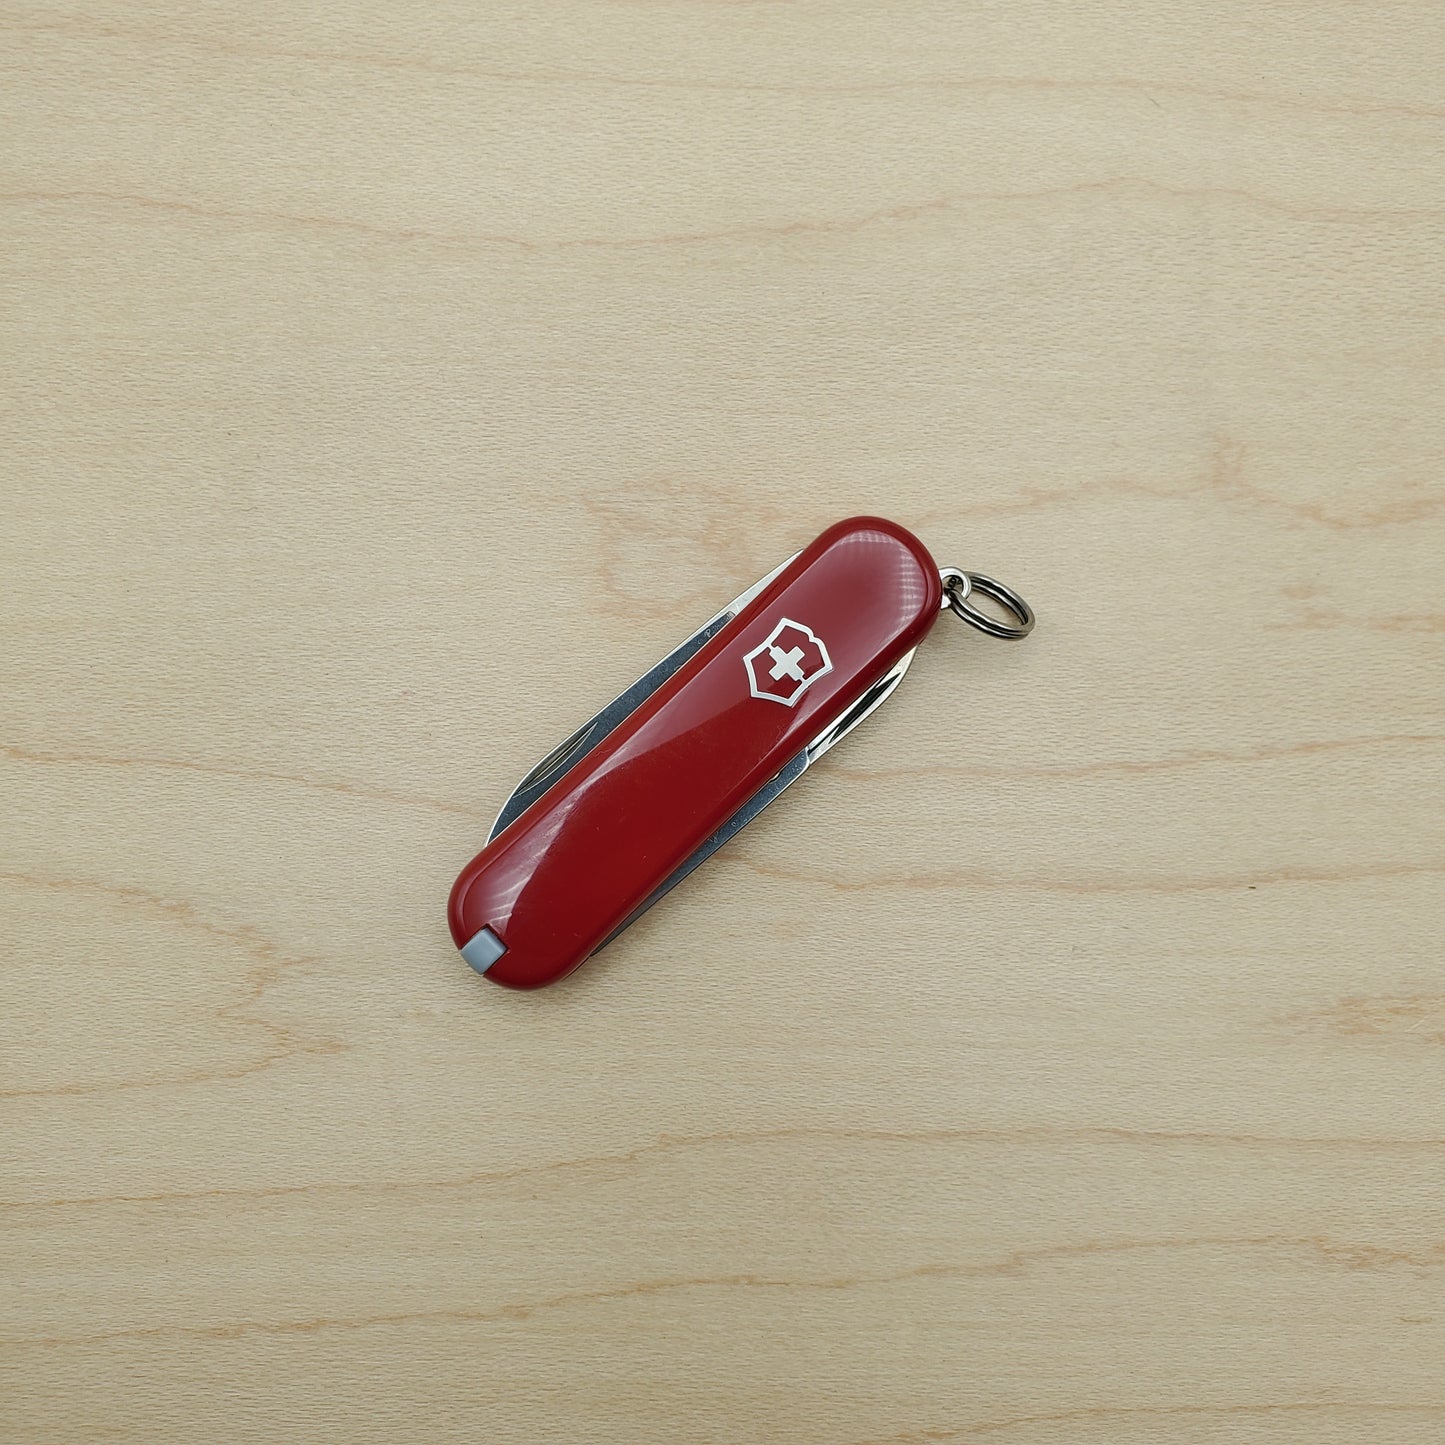 Victorinox Swiss Army Knife - Classic SD Red